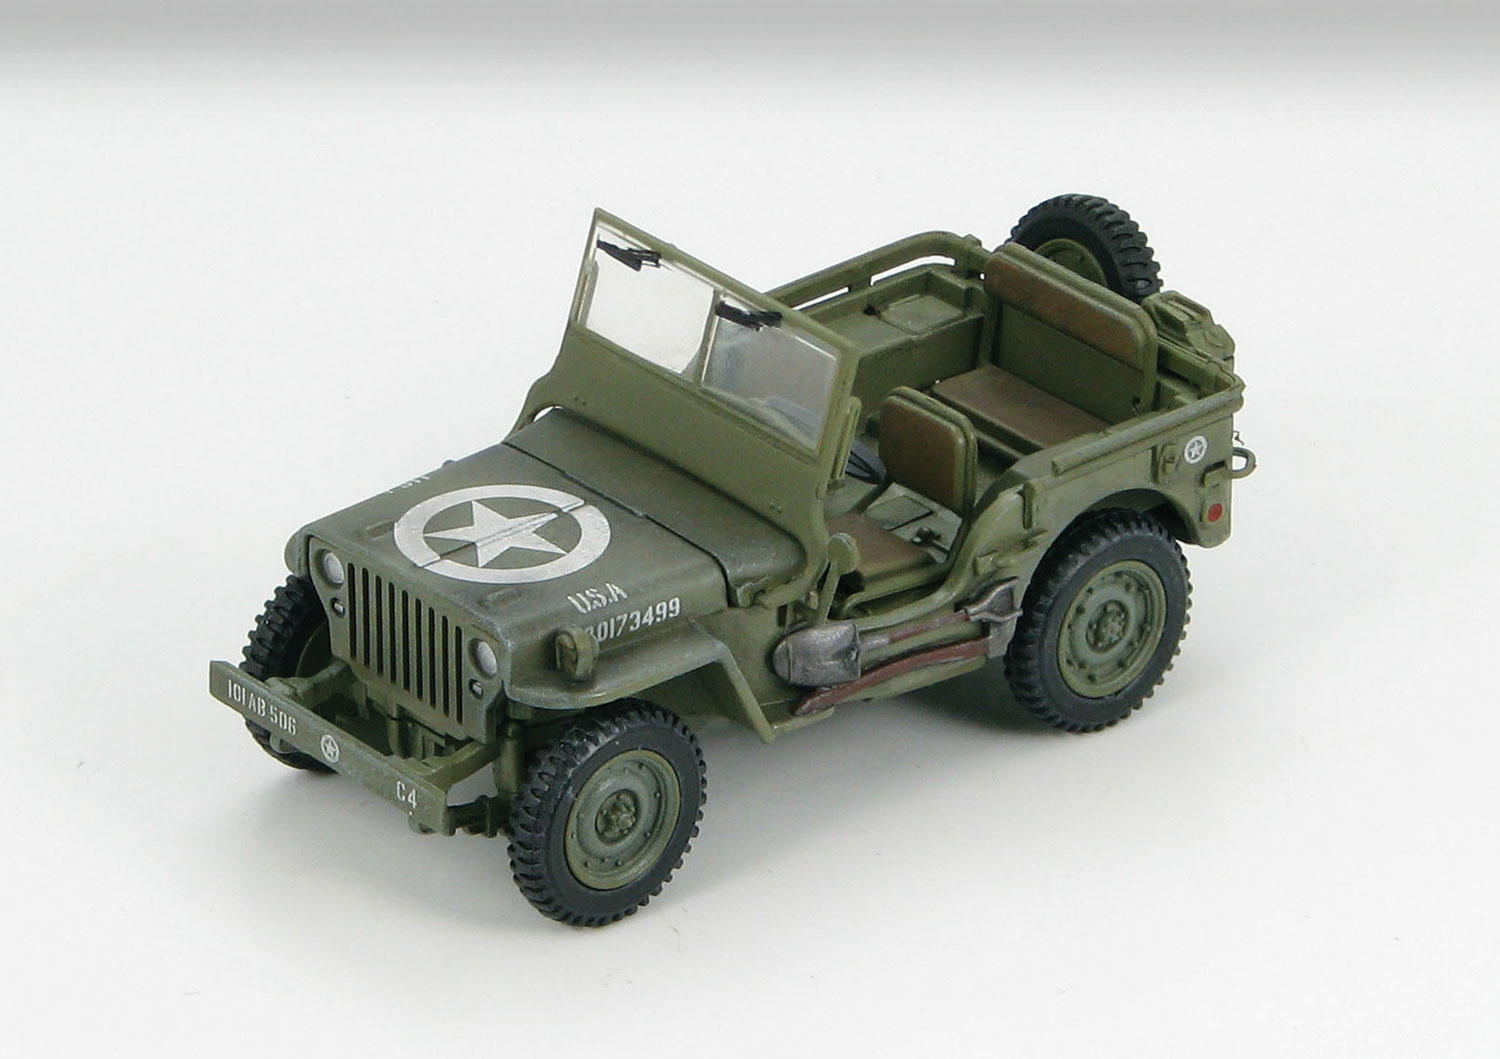 HG1601 Willys MB Jeep 101st Airborne Div 1944 148 Scale